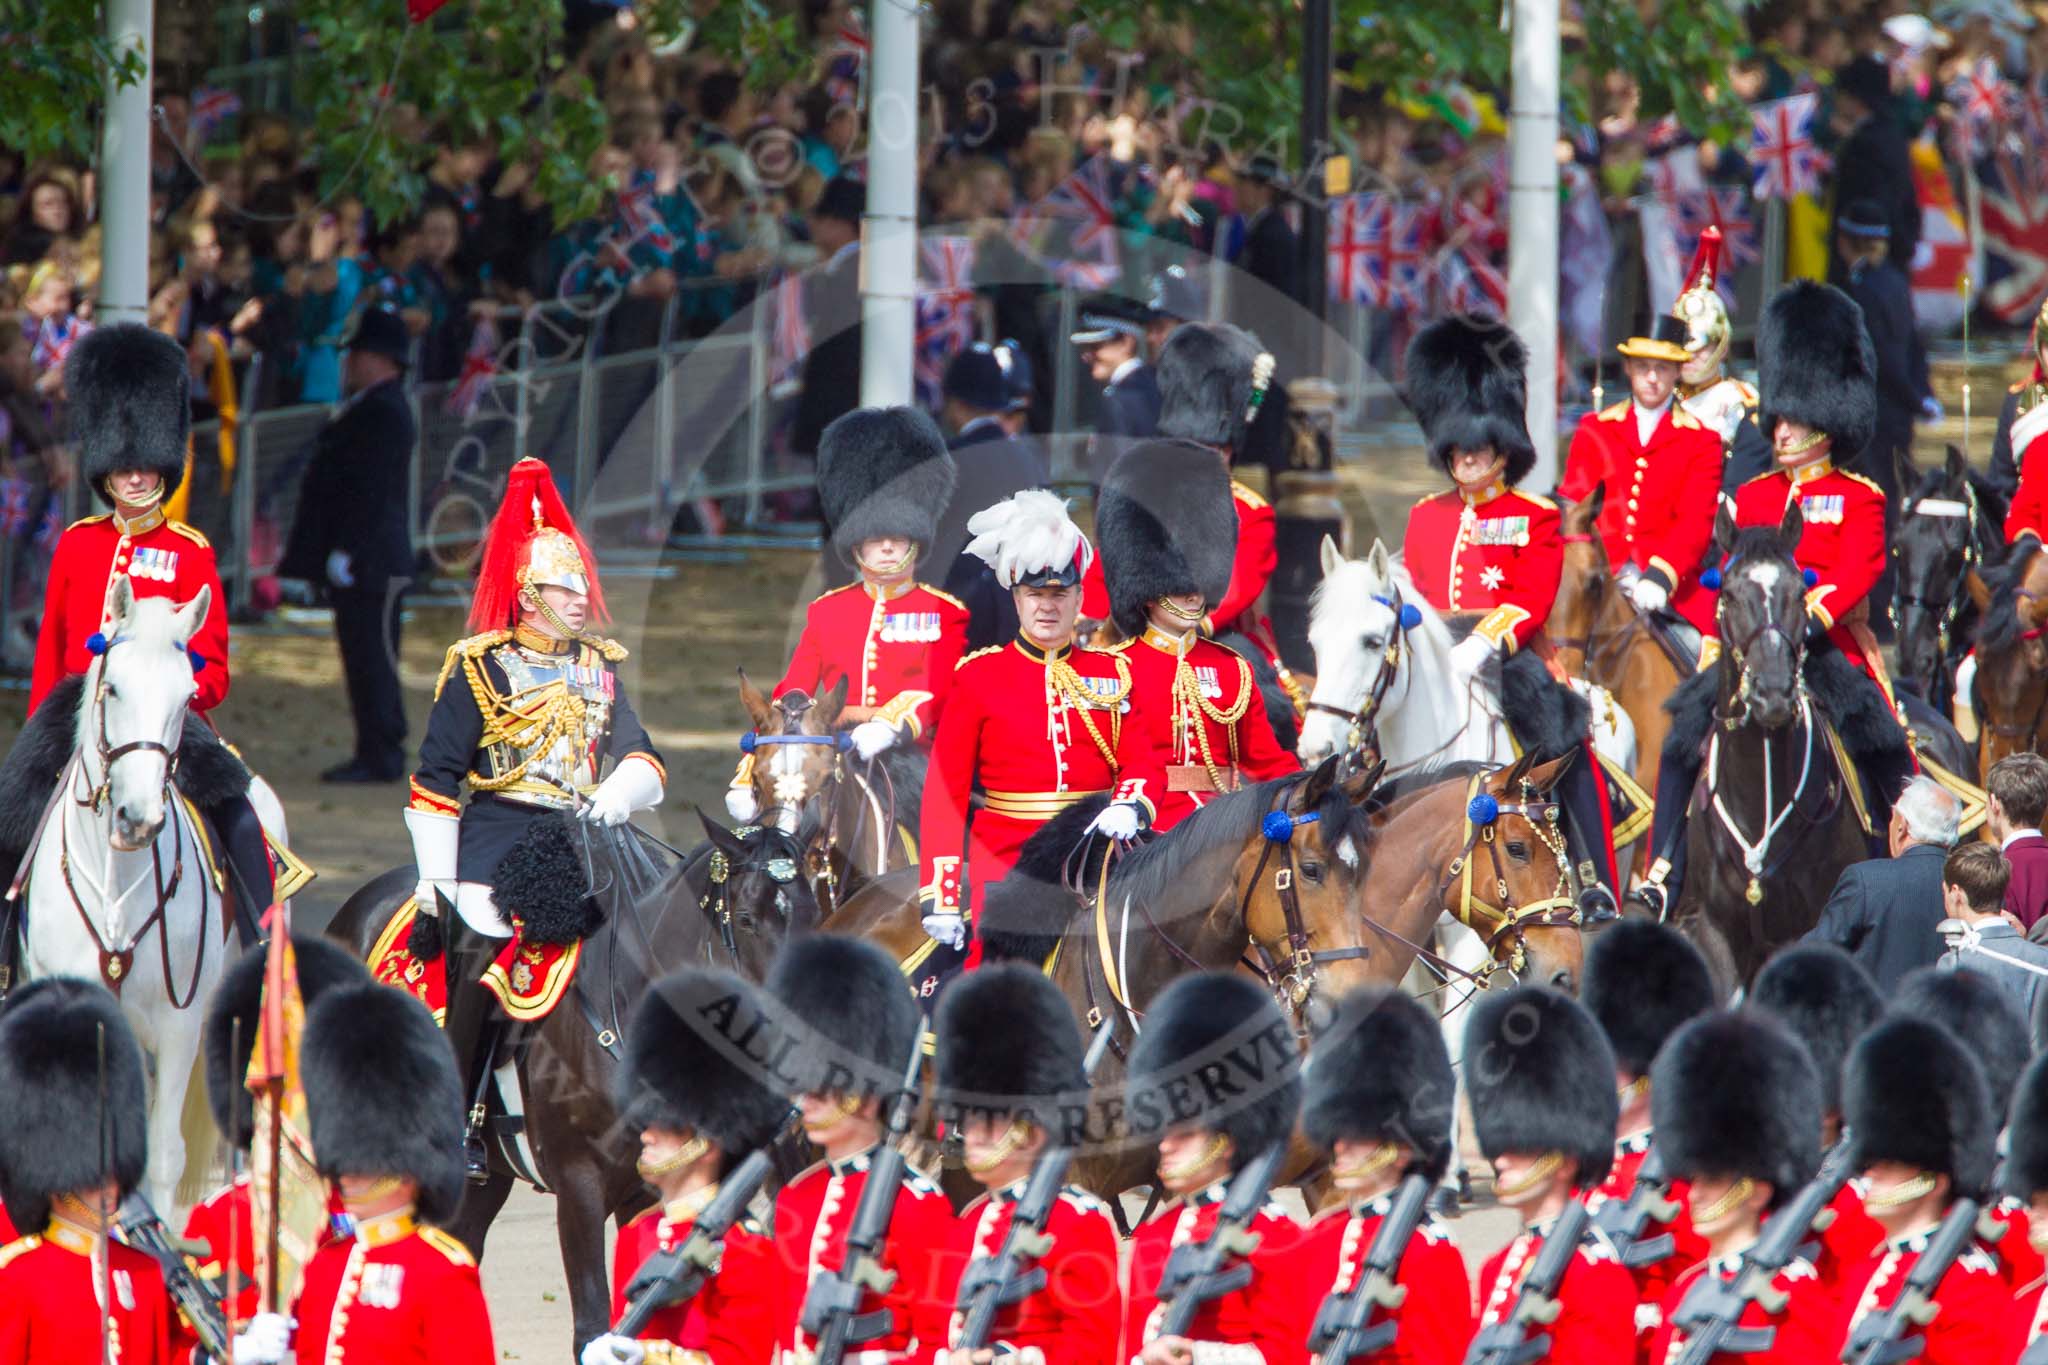 Trooping the Colour 2013: The Chief of Staff, Colonel Hugh Bodington, Welsh Guards, and other members of the Royal Procession (see the following images) are turning onto Horse Guards Parade. Image #267, 15 June 2013 10:58 Horse Guards Parade, London, UK